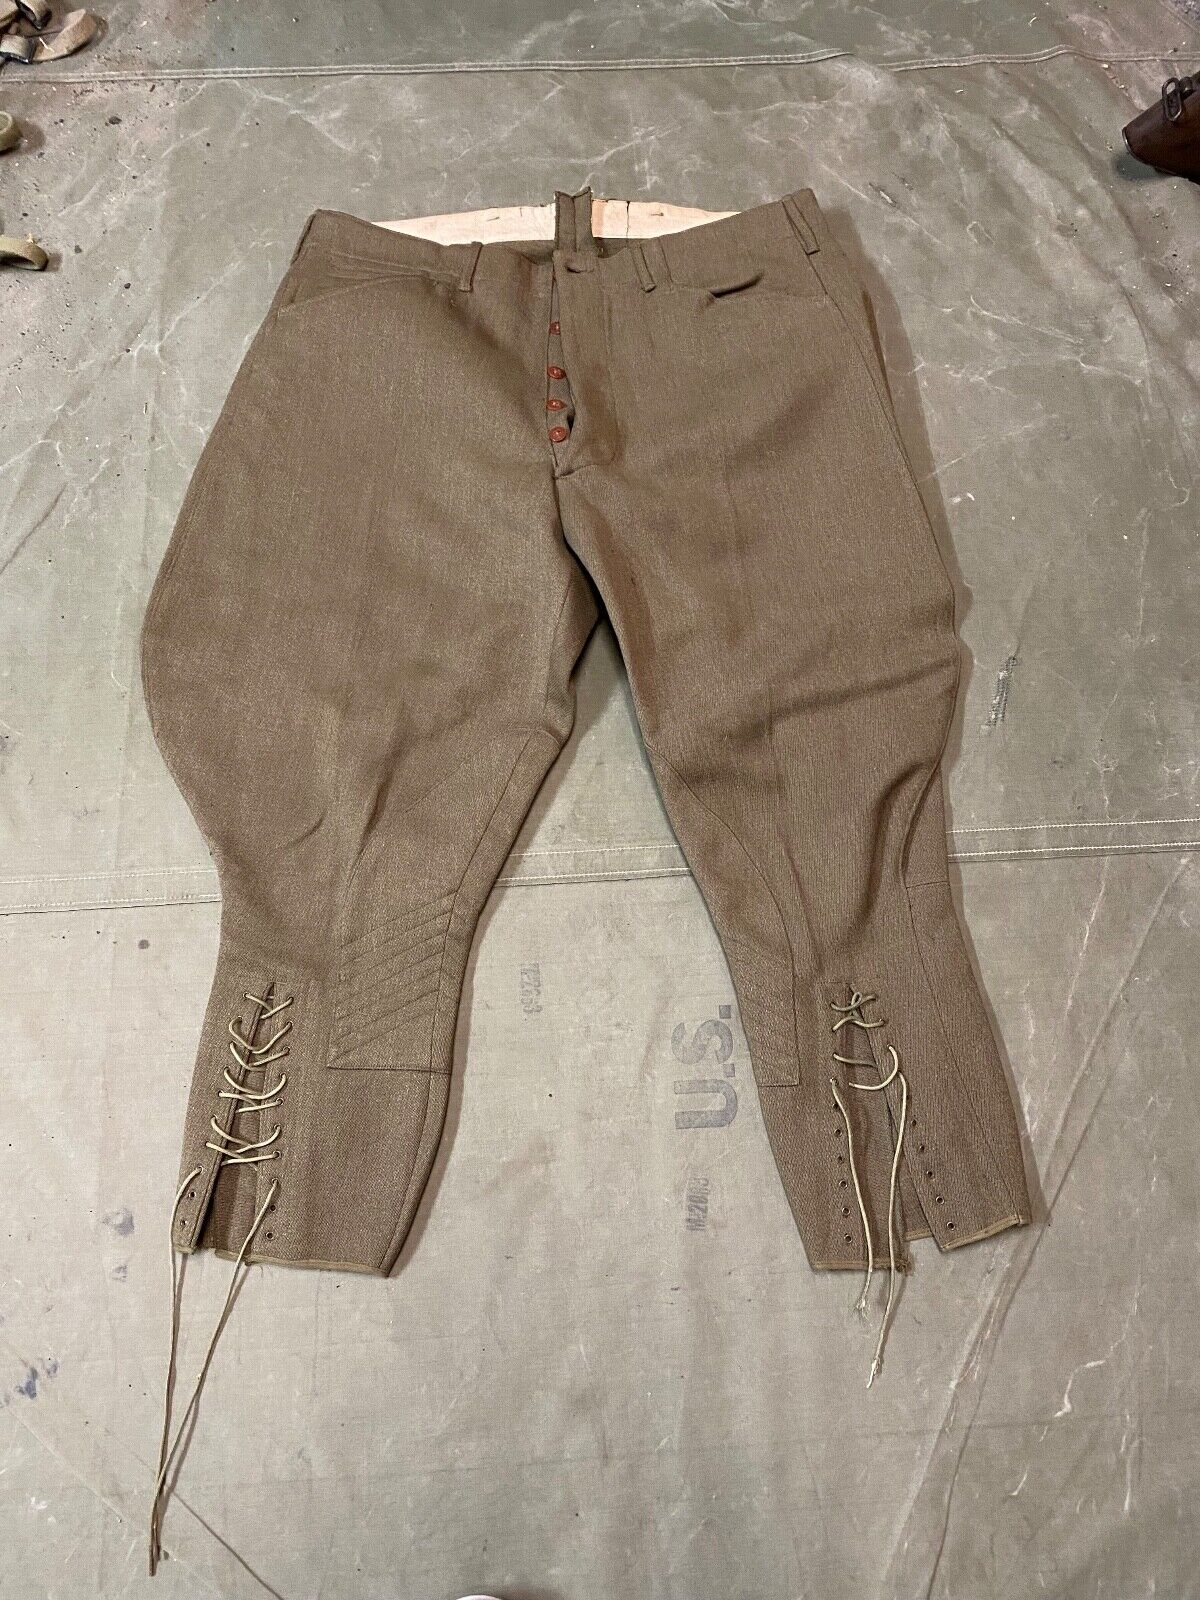 ORIGINAL WWII US ARMY OFFICER NCO M1935 CAVALRY RIDING BREECHES- SIZE XLARGE